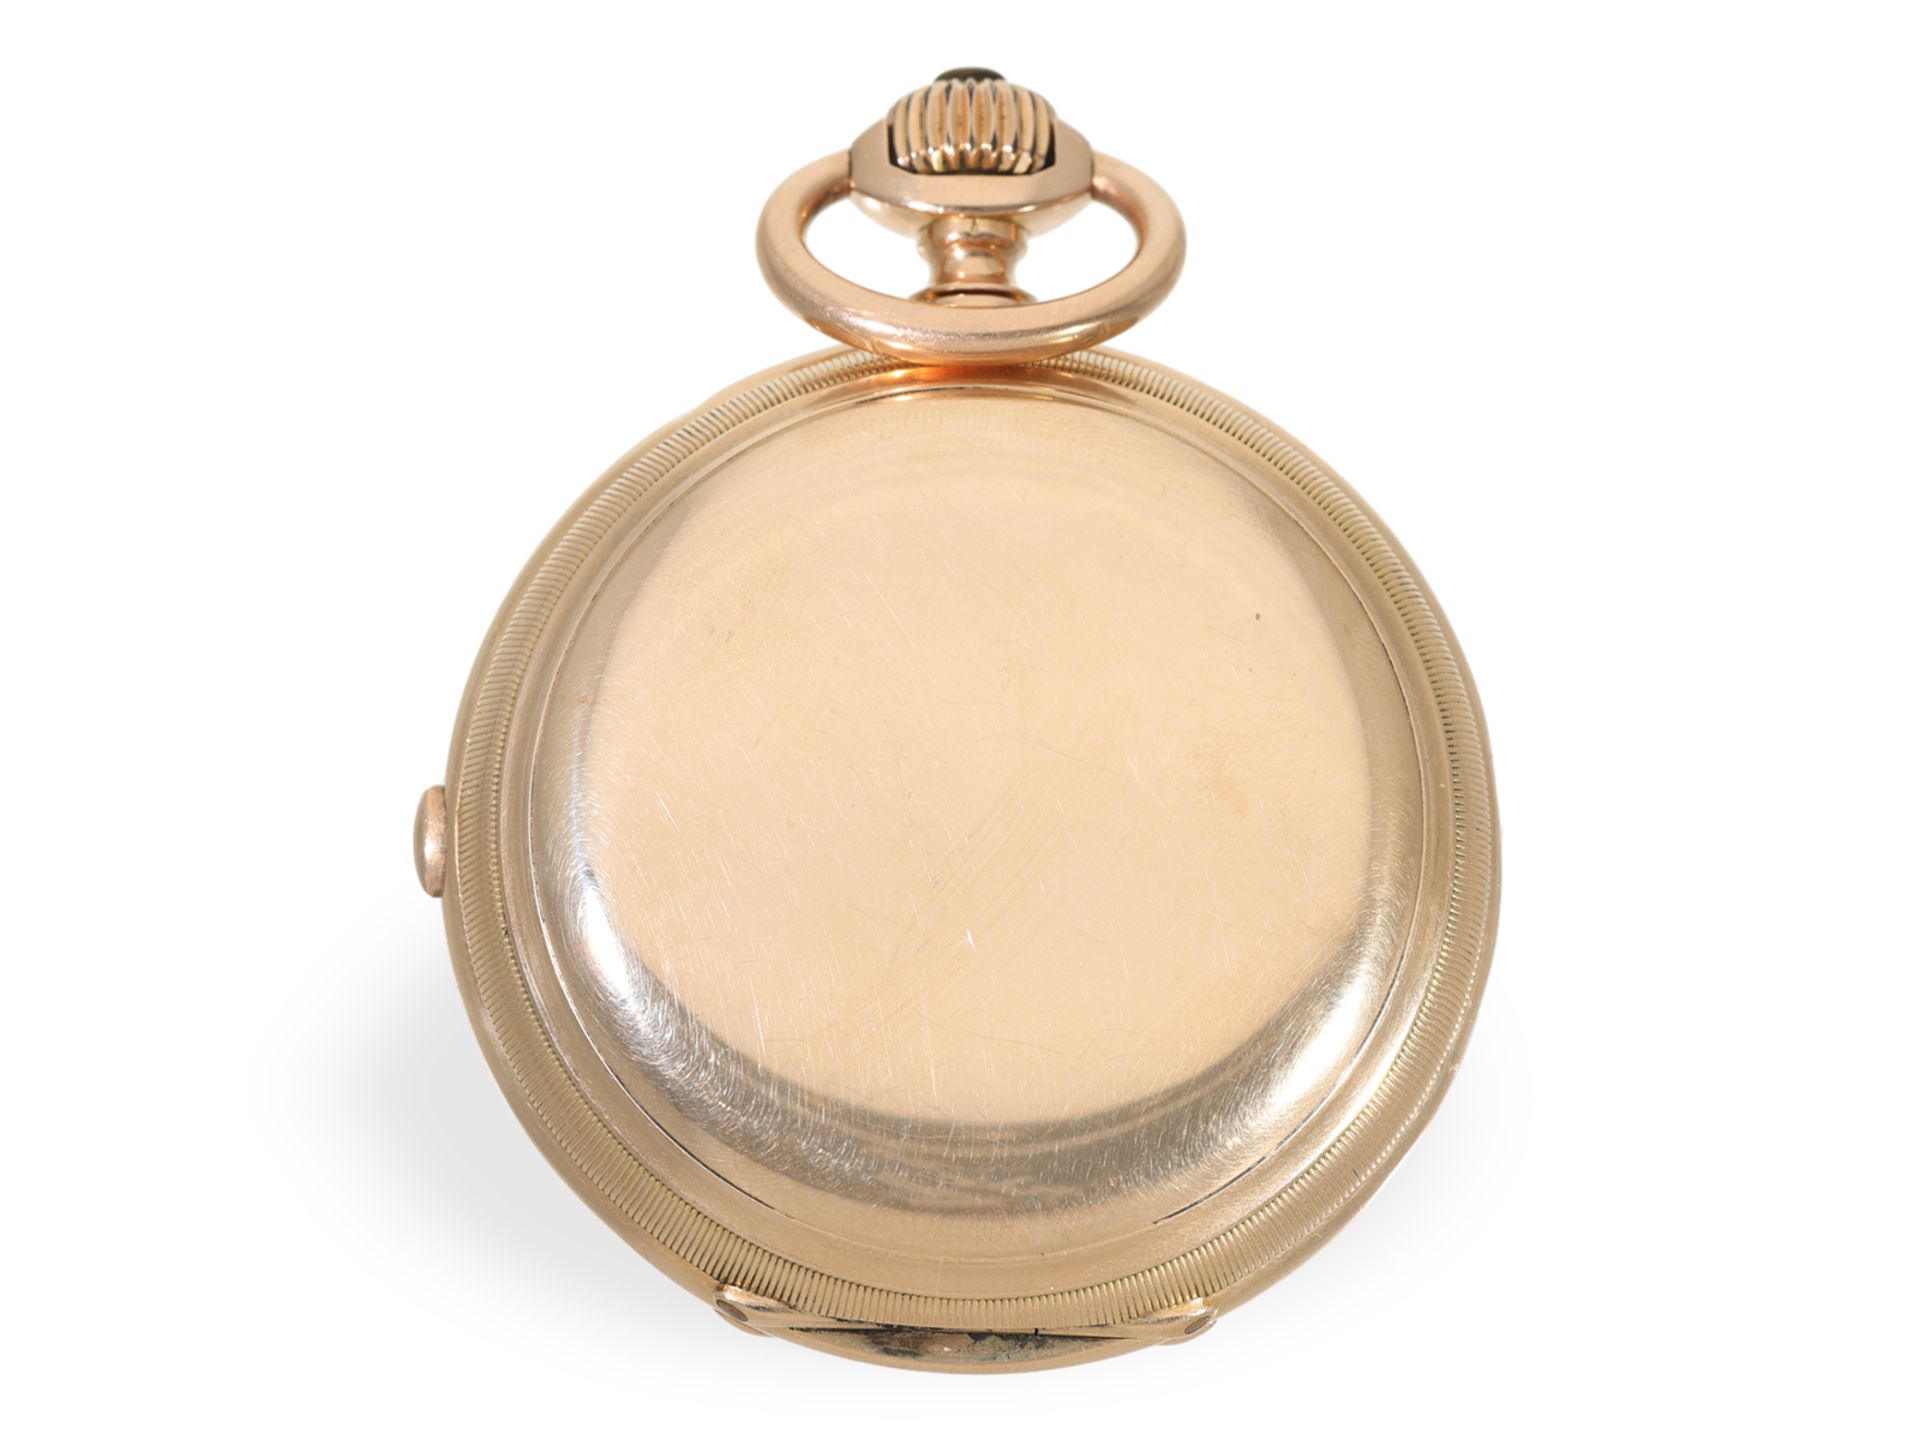 Pocket watch: especially heavy Ankerchronometer with chronograph, ca. 1890 - Image 8 of 8